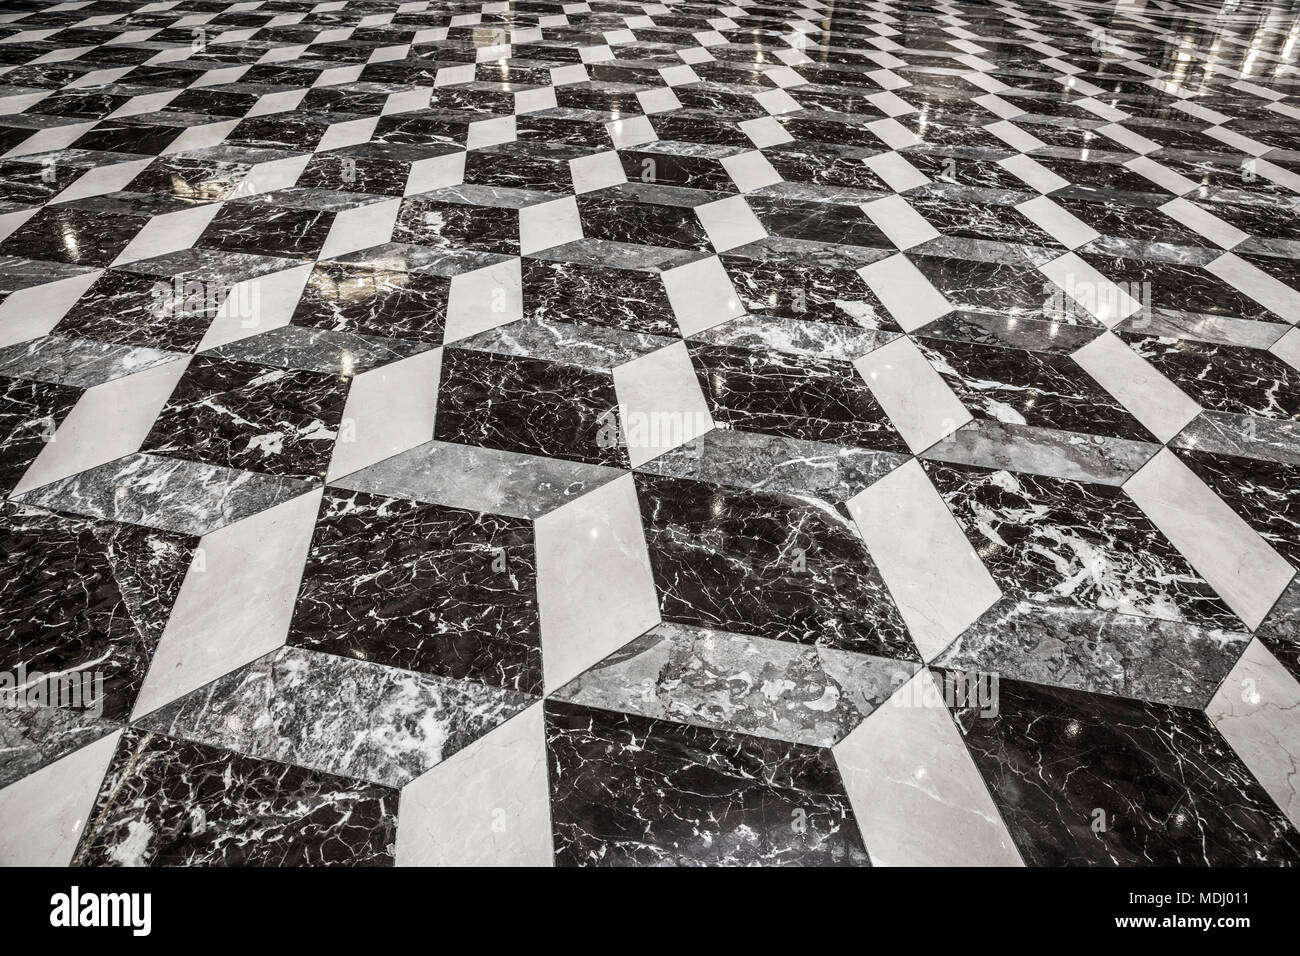 Floor of an office building that looks three-dimensional in a geometric pattern of black and white; Connecticut, United States of America Stock Photo